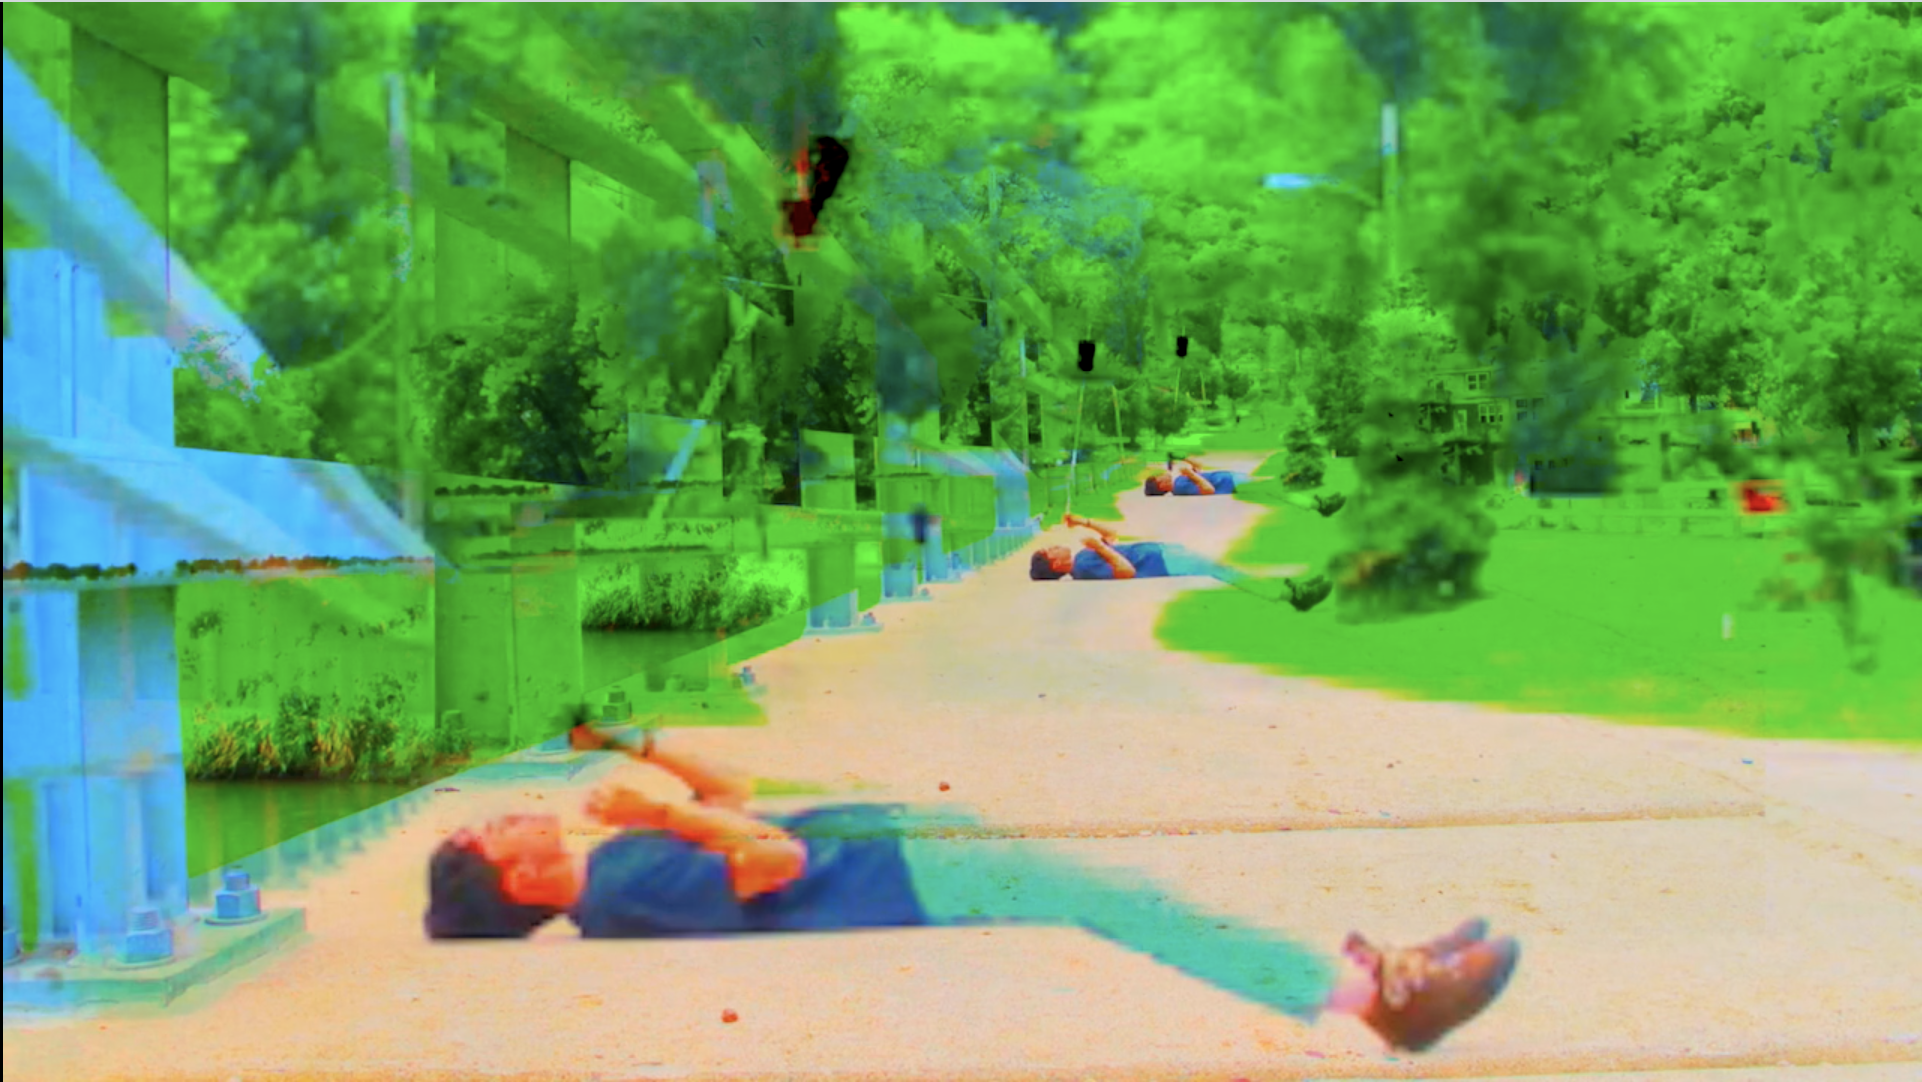 Saturated image with digital glitches of a person laying on the ground holding a stick in the air